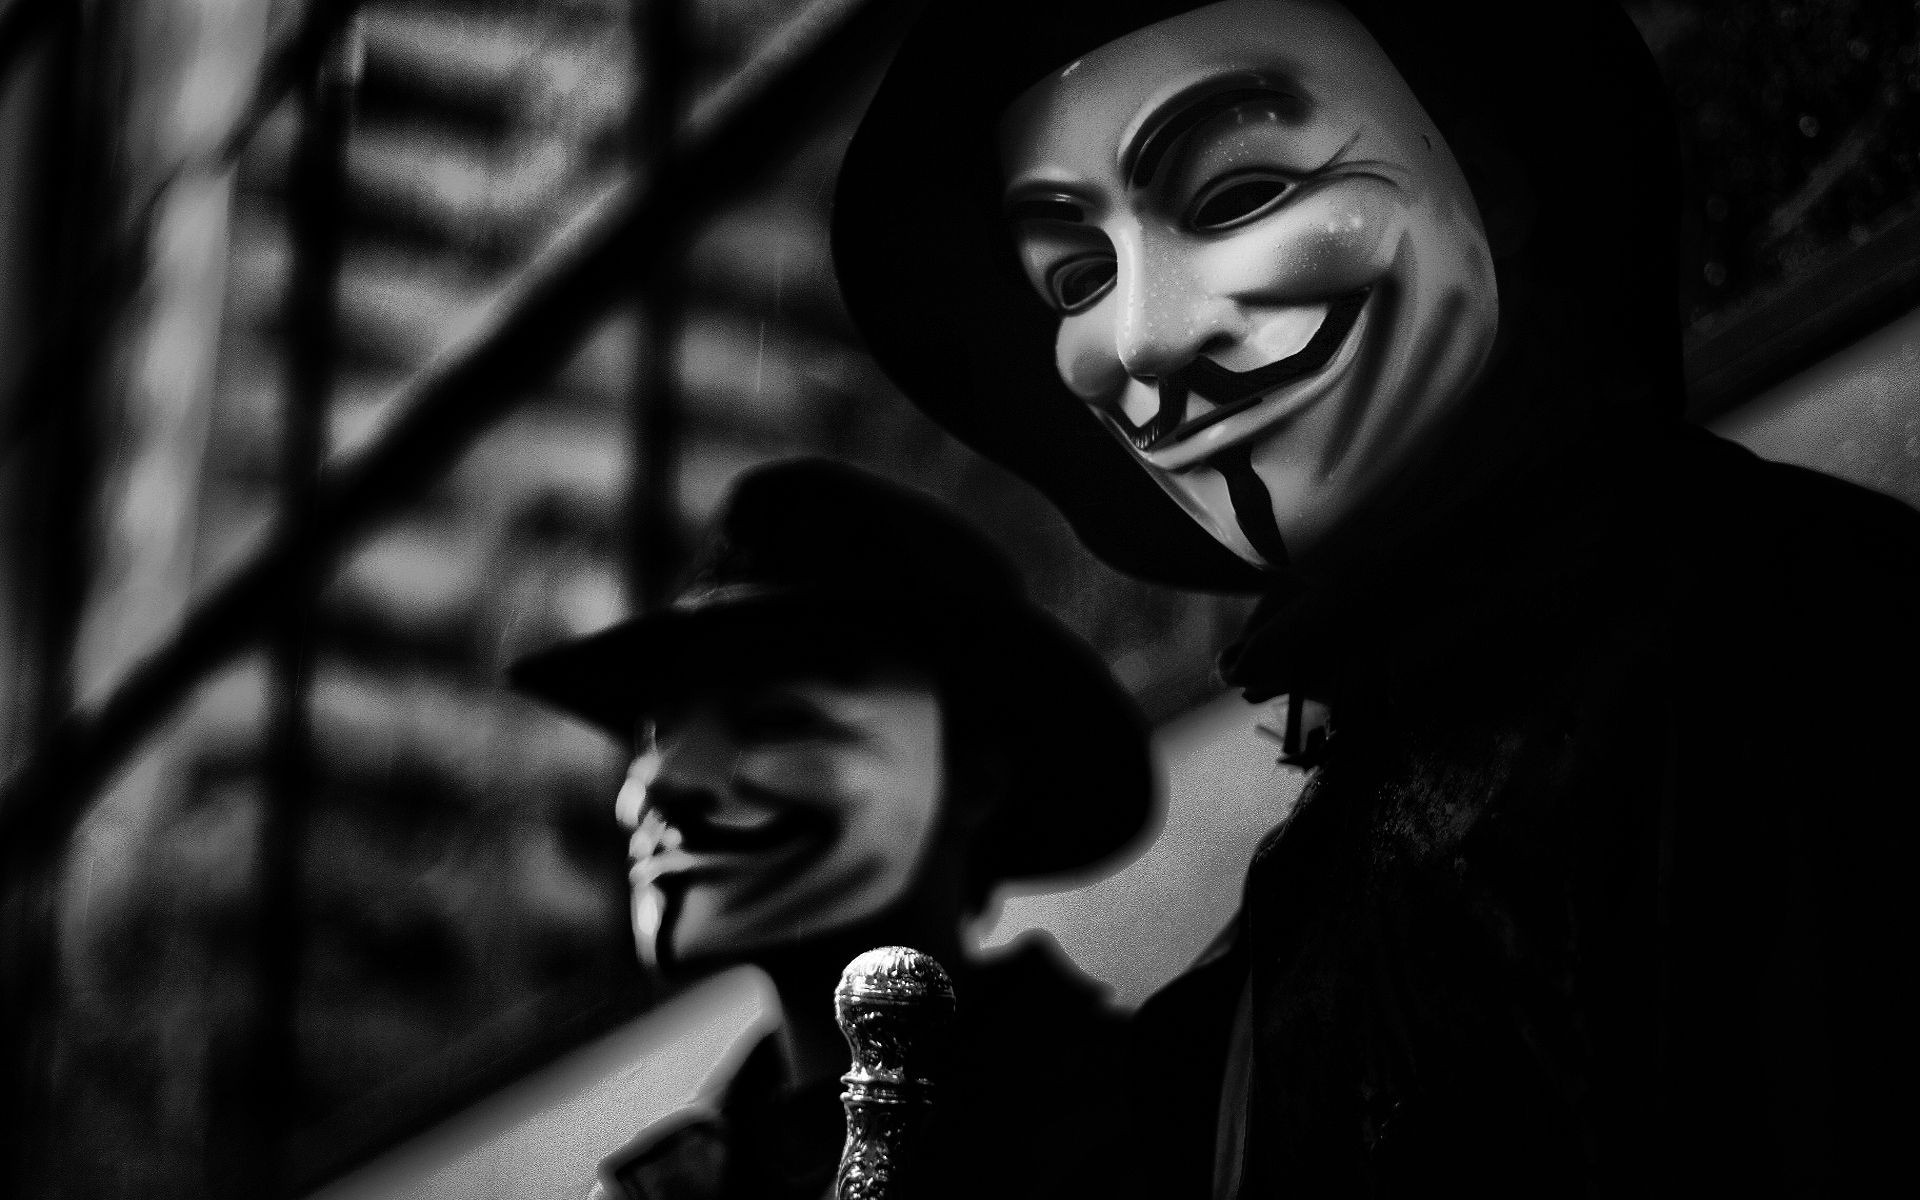 px anarchy Anonymous Dark horror mask movie High Quality Wallpaper, High Definition Wallpaper